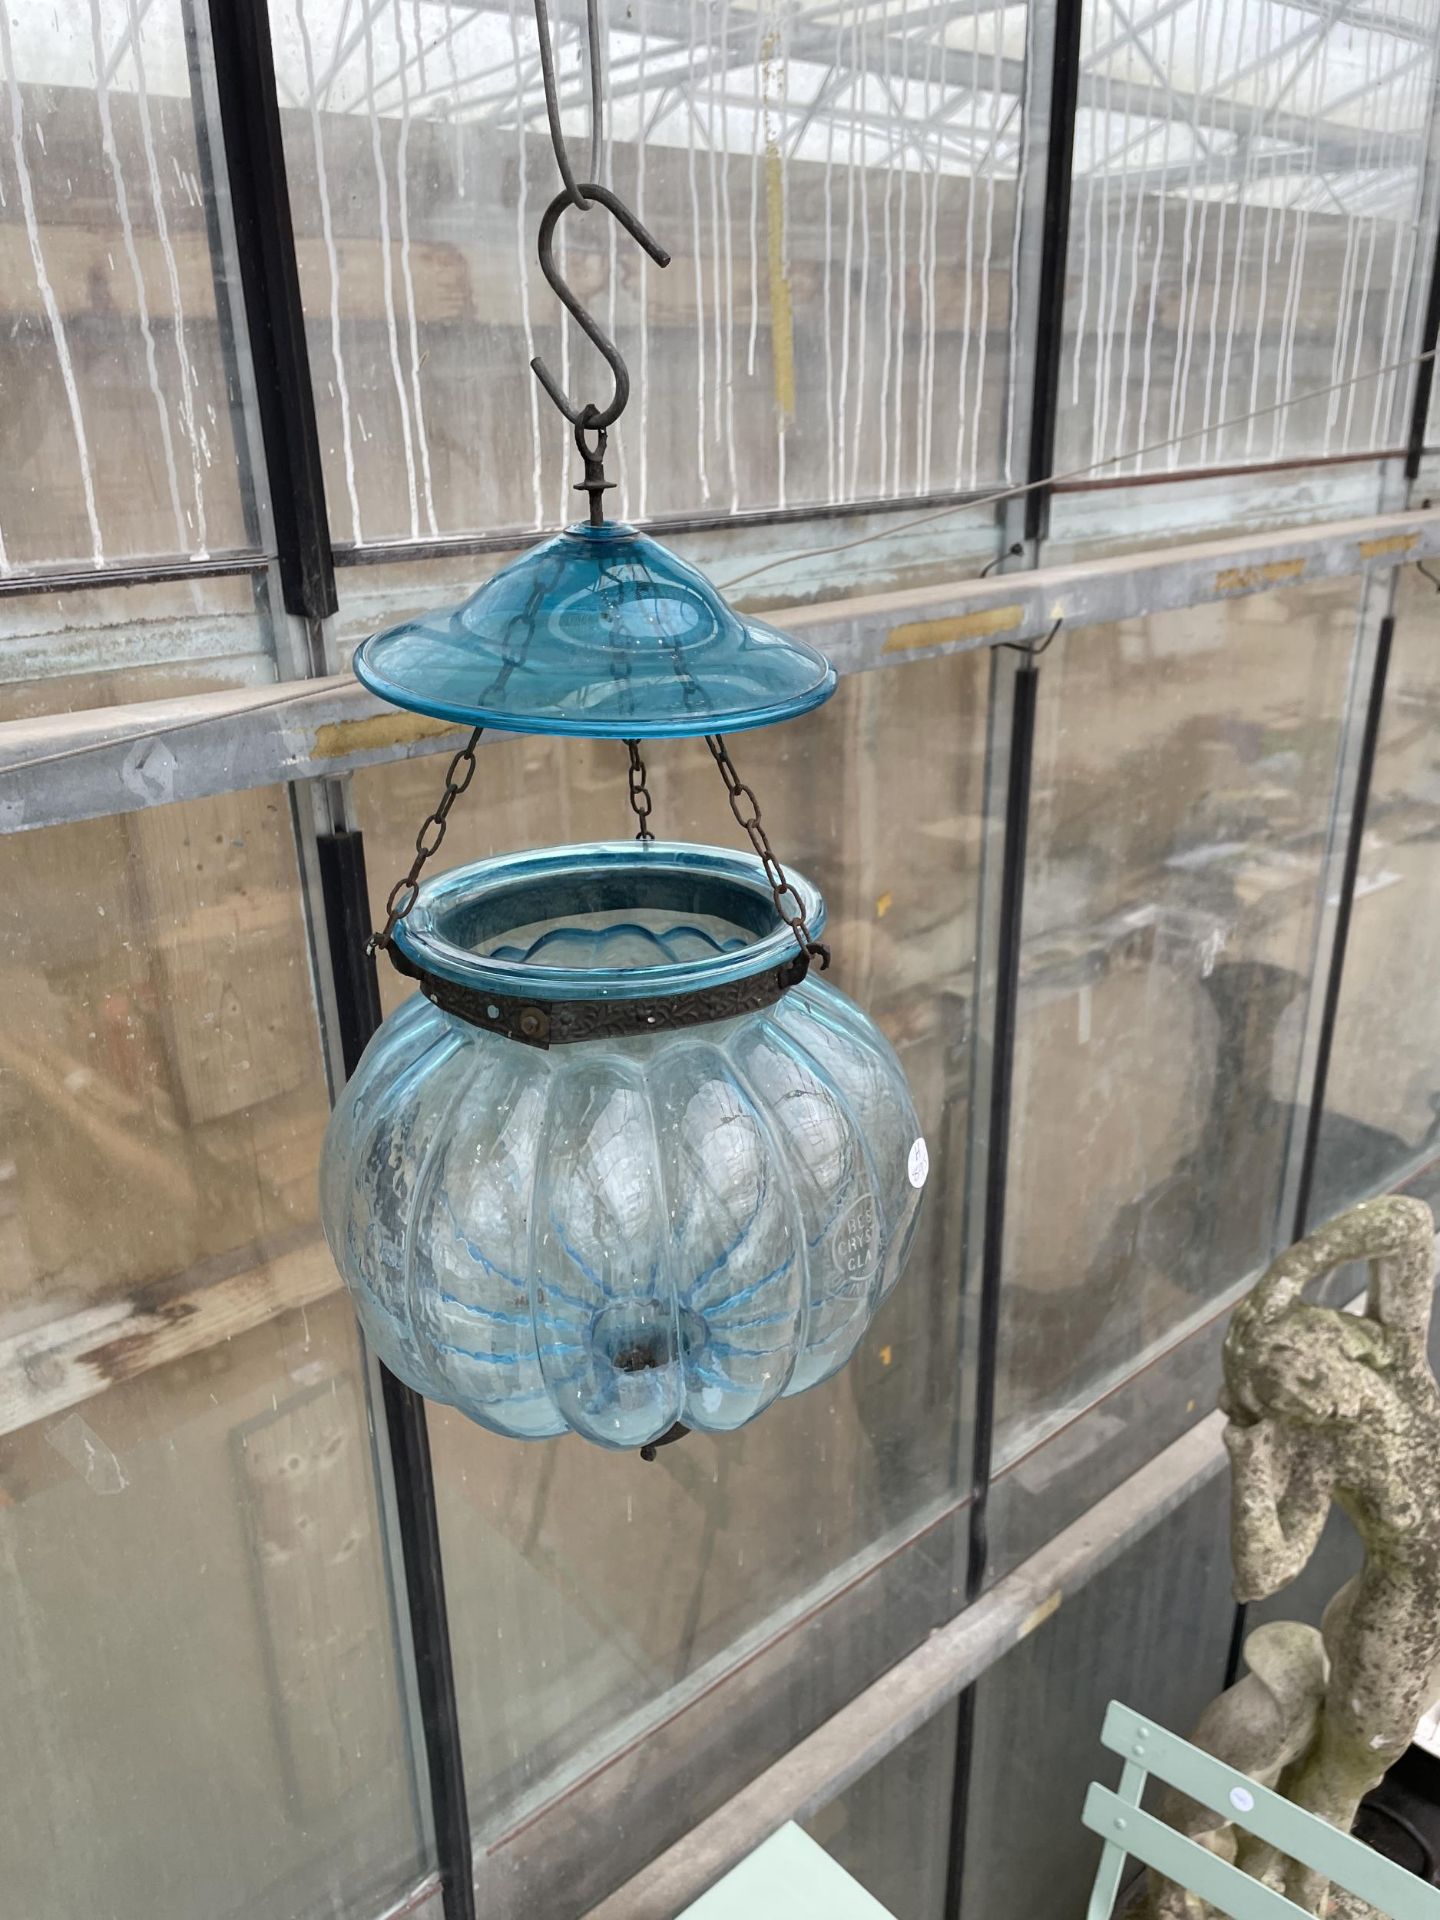 A BLUE GLASS HANGING CANDLE LANTERN MARKED 'VAL SYLAMBLRI BEST CRYSTAL GLASS MADE IN BELGIUM' - Image 4 of 4